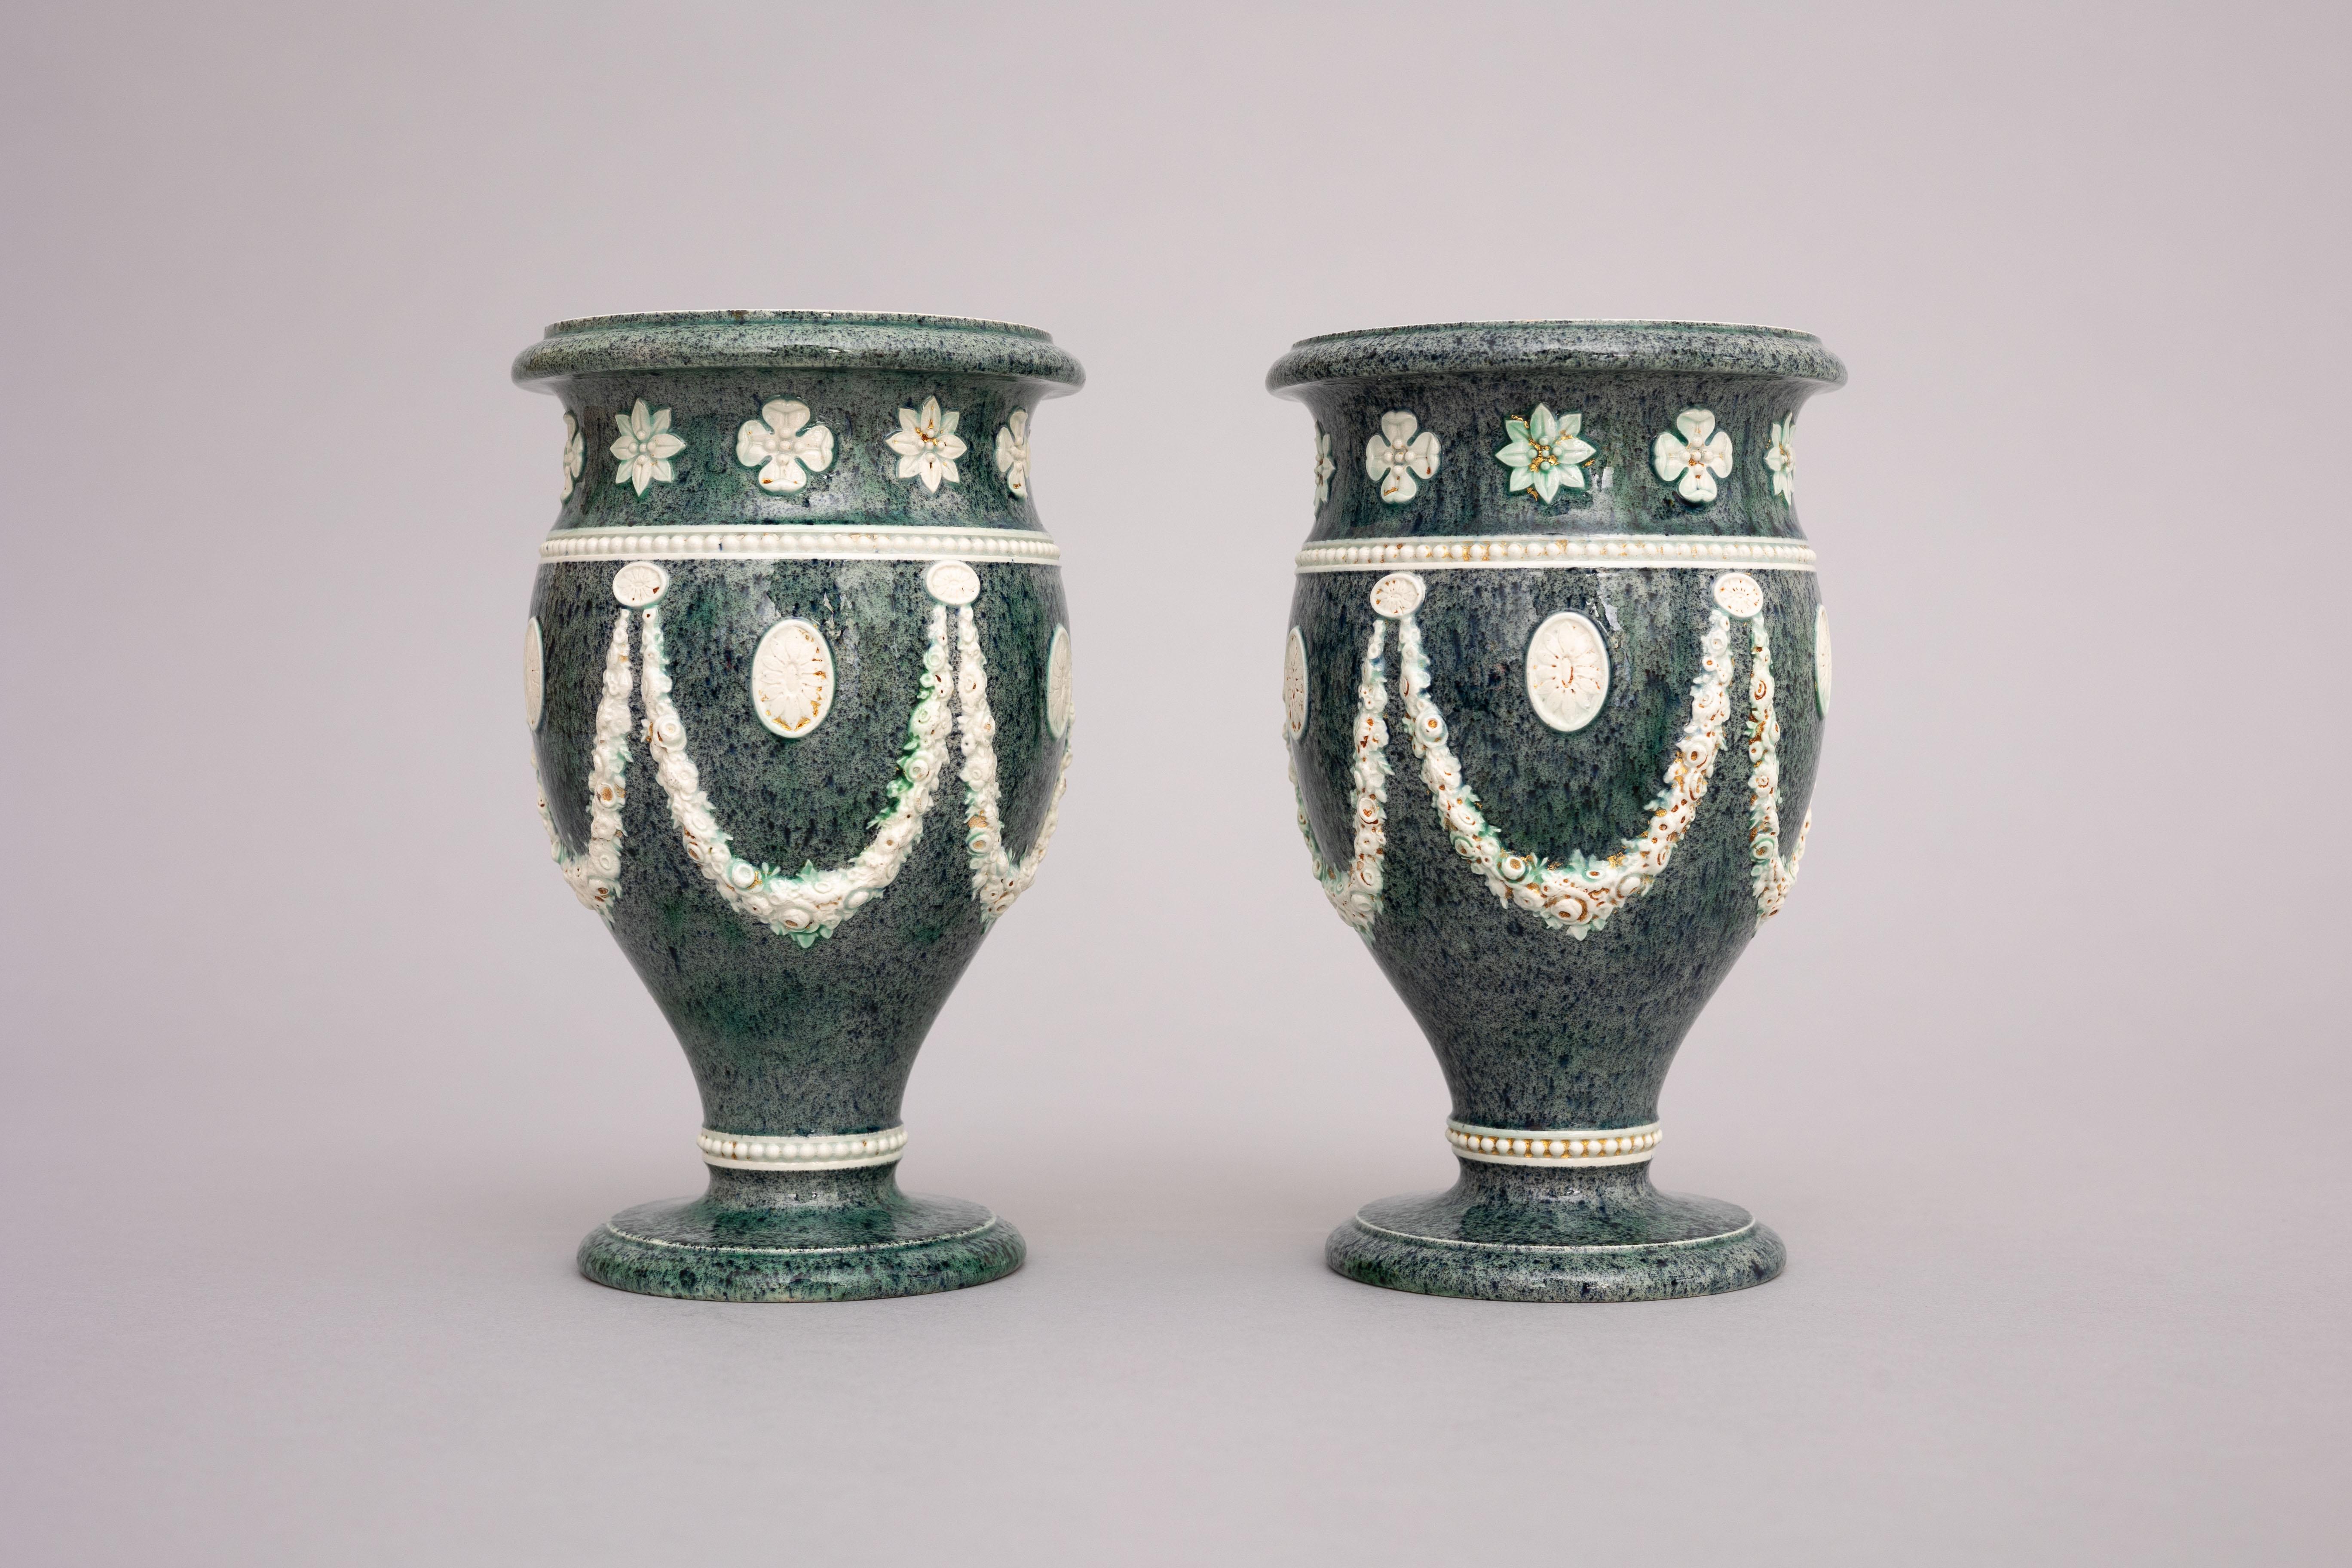 British Pair of Early Wedgwood Pearlware Porphyry Urns